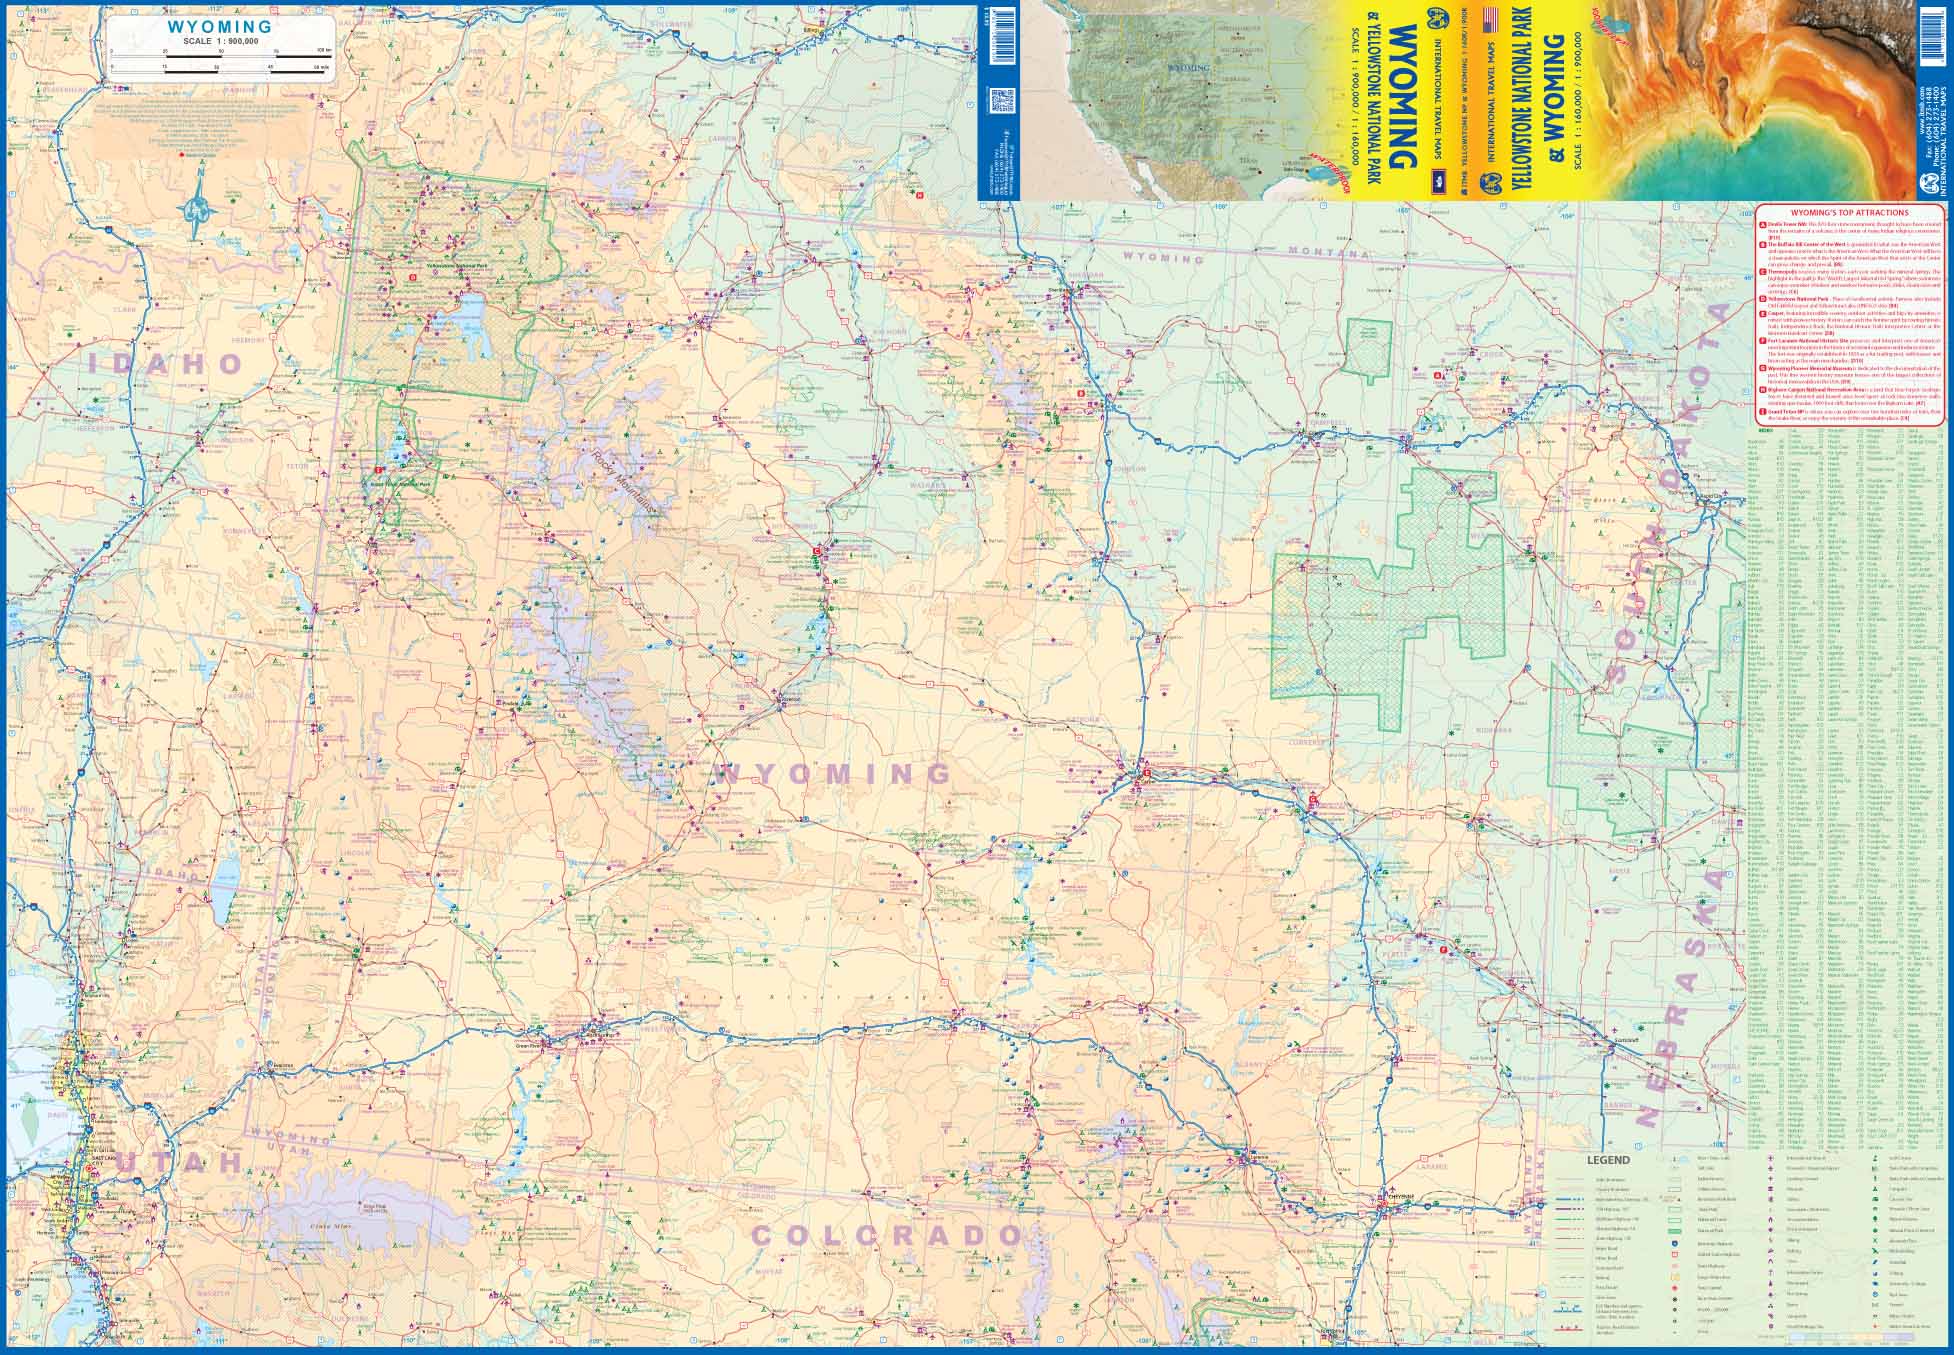 Yellowstone National Park & Wyoming ITM Map 1e